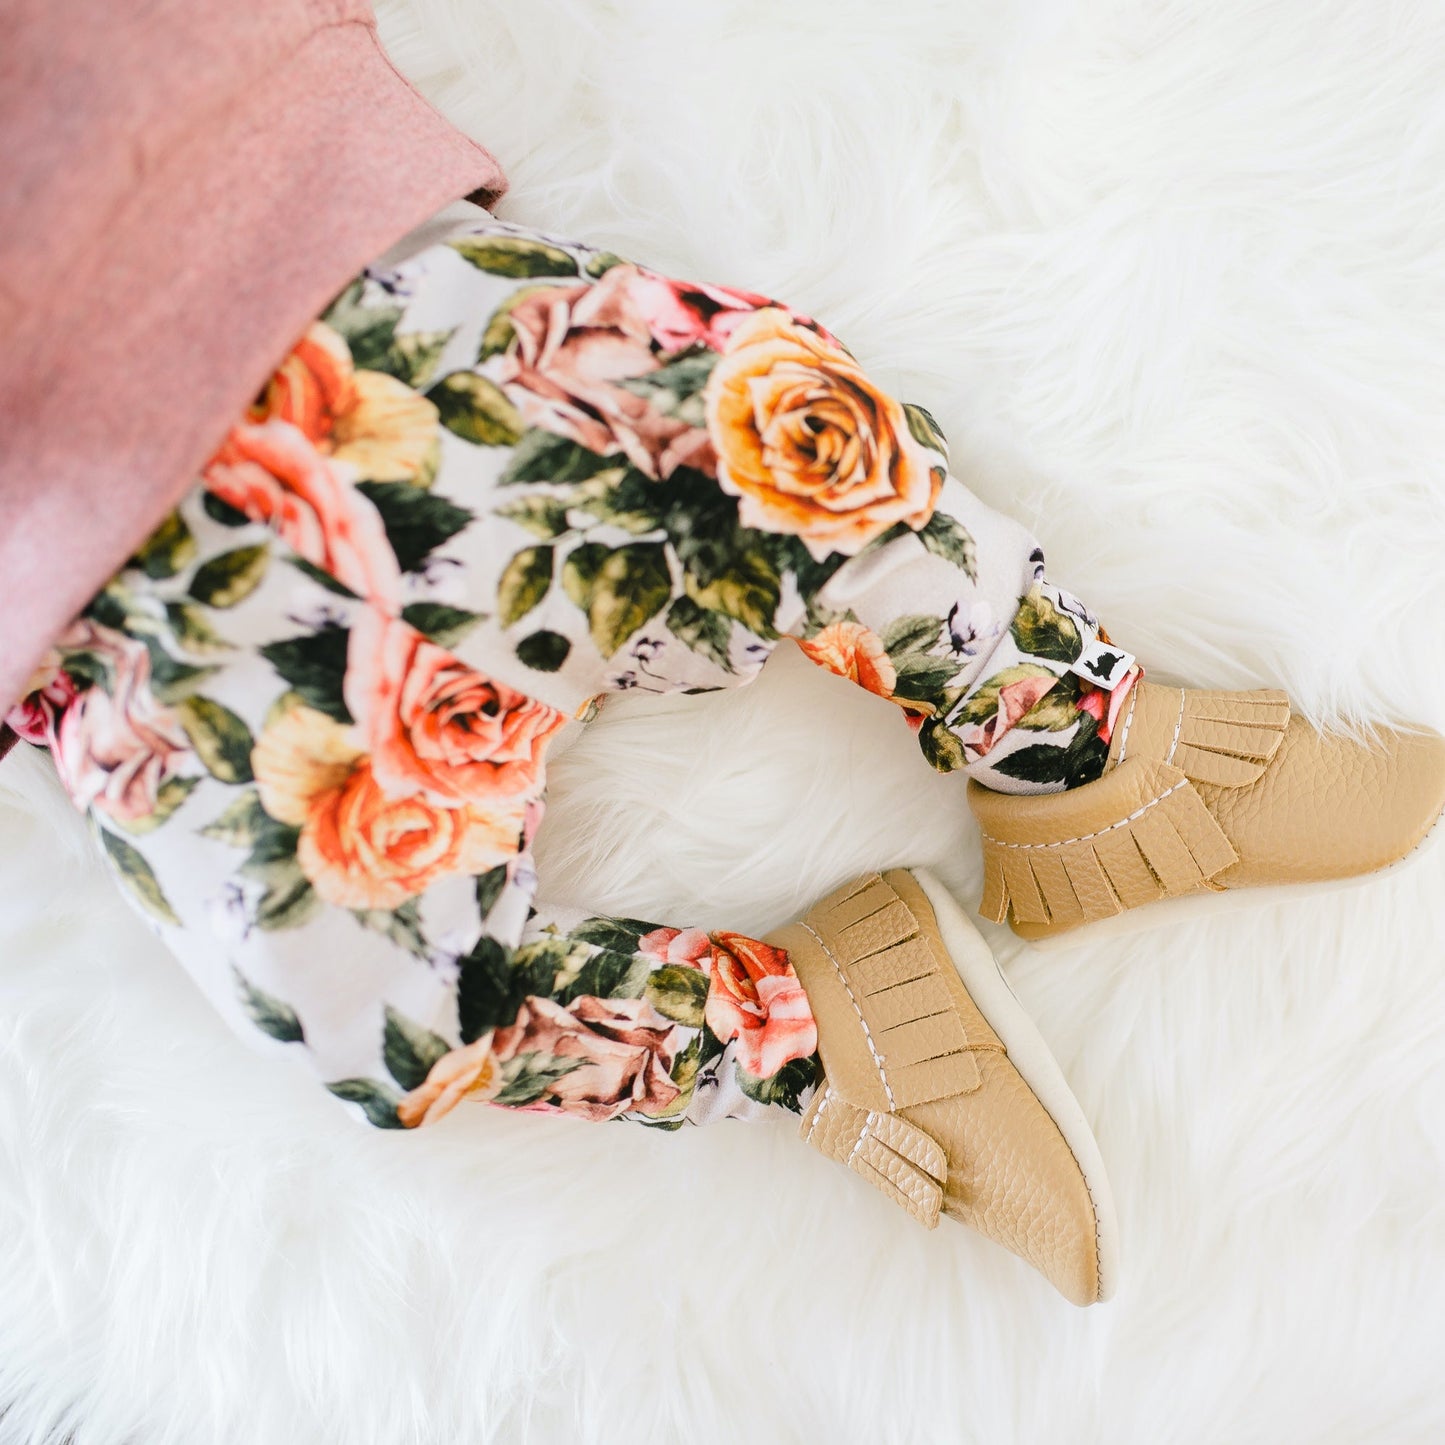 Floral Leggings, Flatforms and a Bajillion Babies - THE STYLING